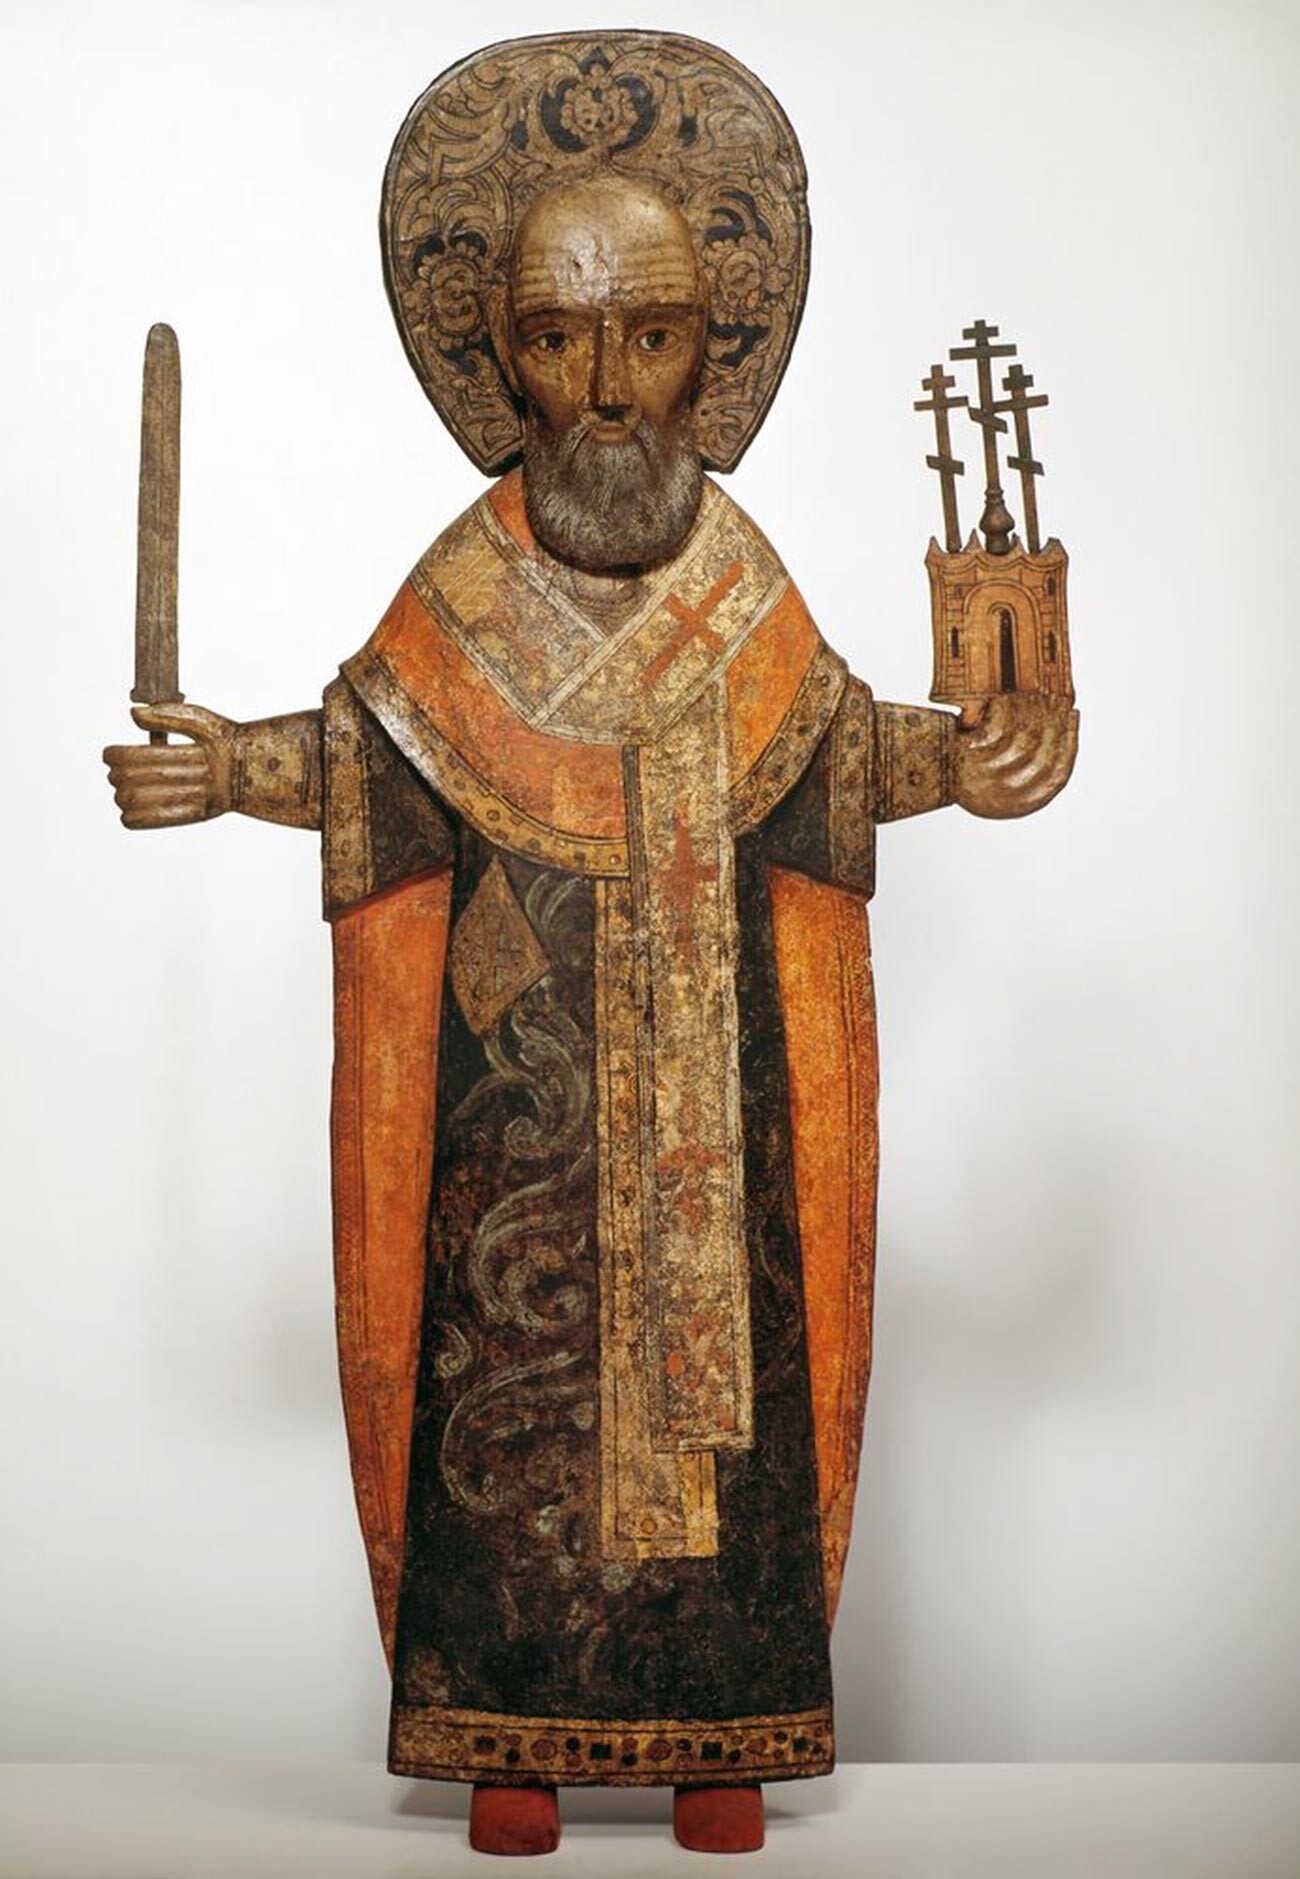 St. Nicholas of Mozhaysk. Wooden sculpture. Late 17th - early 18th century